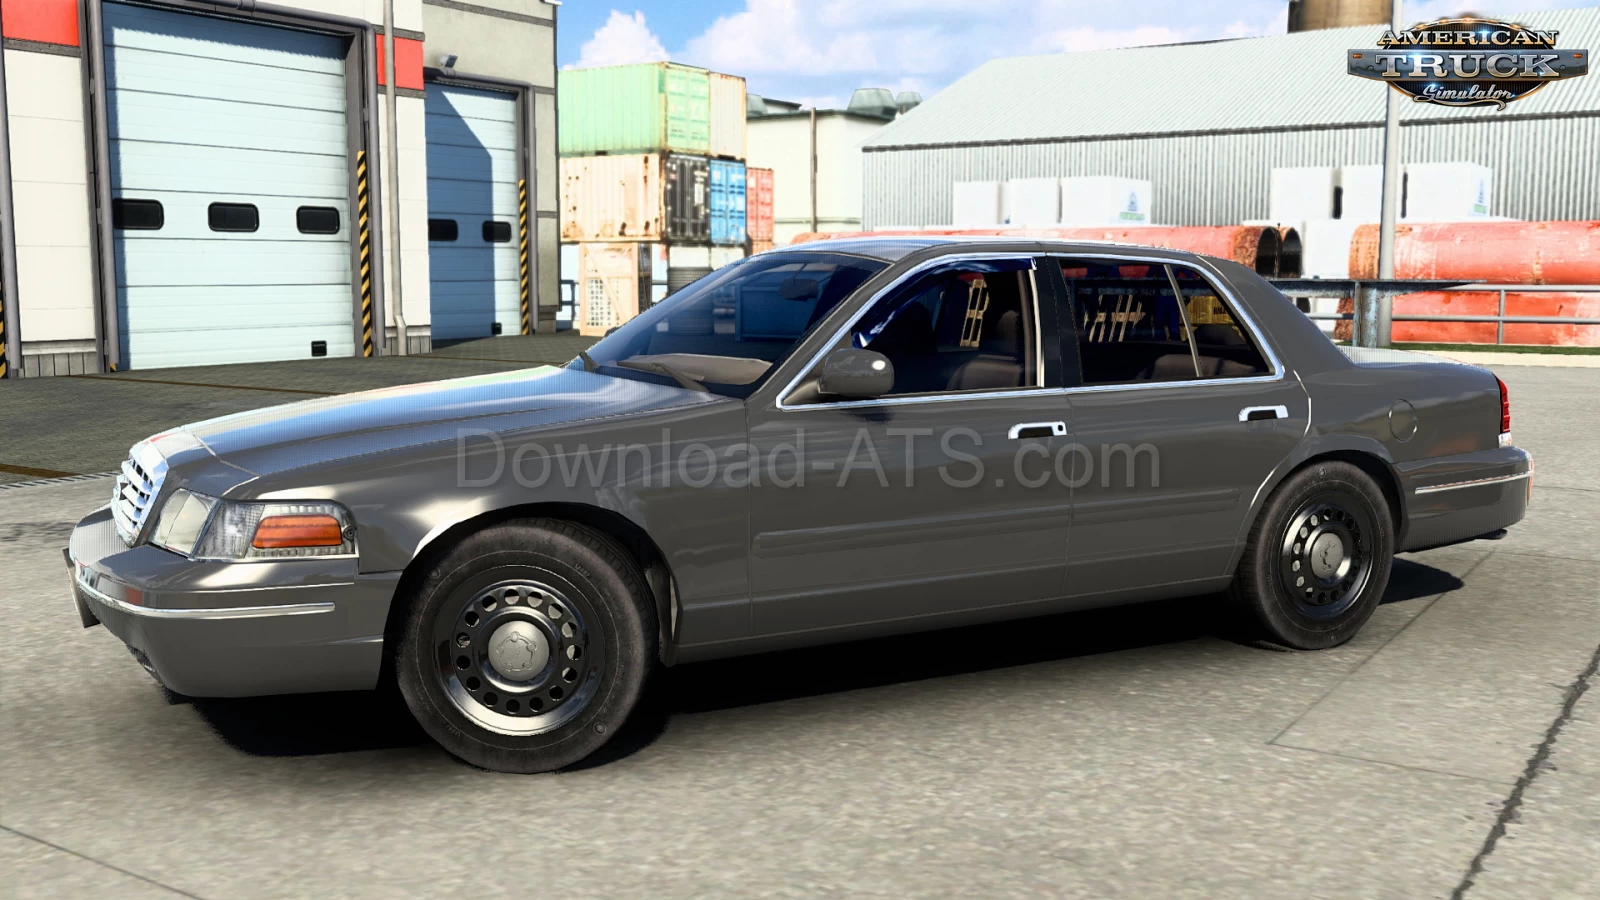 Ford Crown Victoria v5.5 by Metehan BİLAL (1.45.x) for ATS